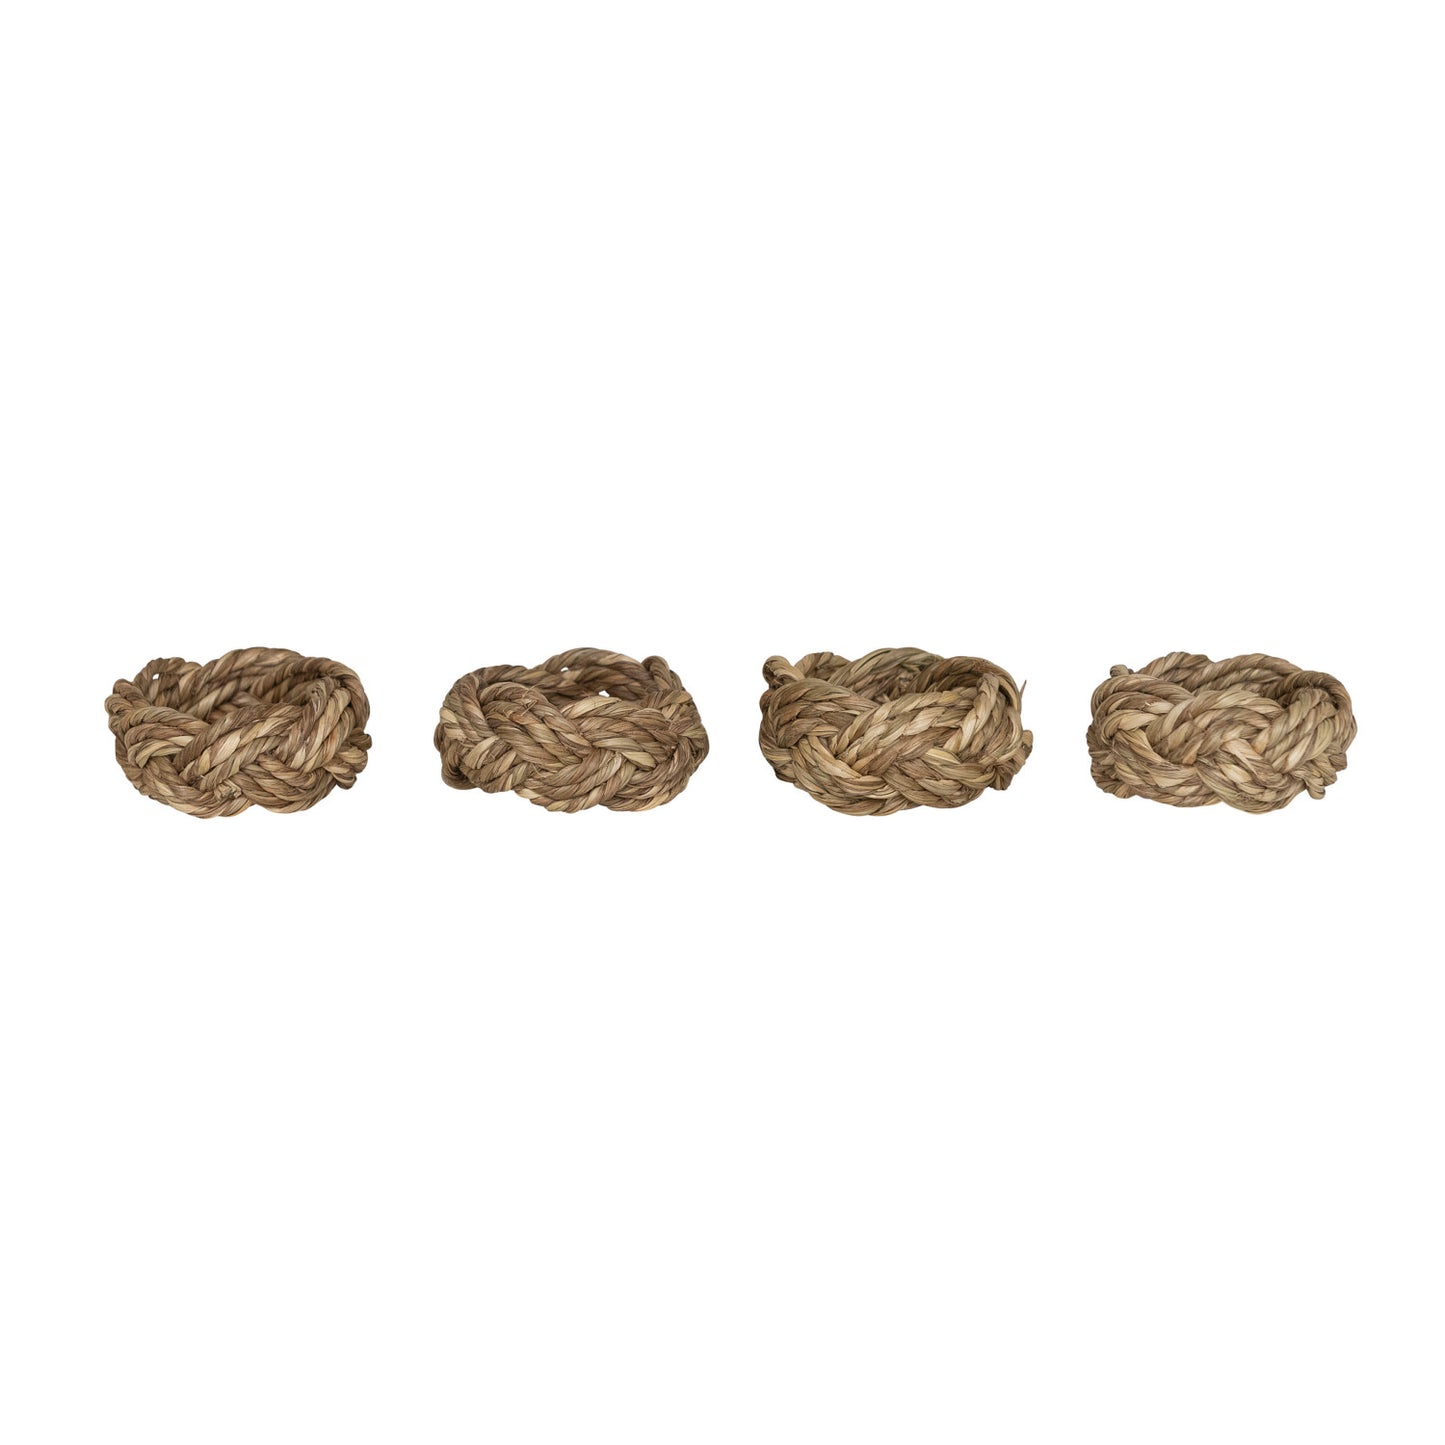 Braided Seagrass Napkin Rings- Set of 4